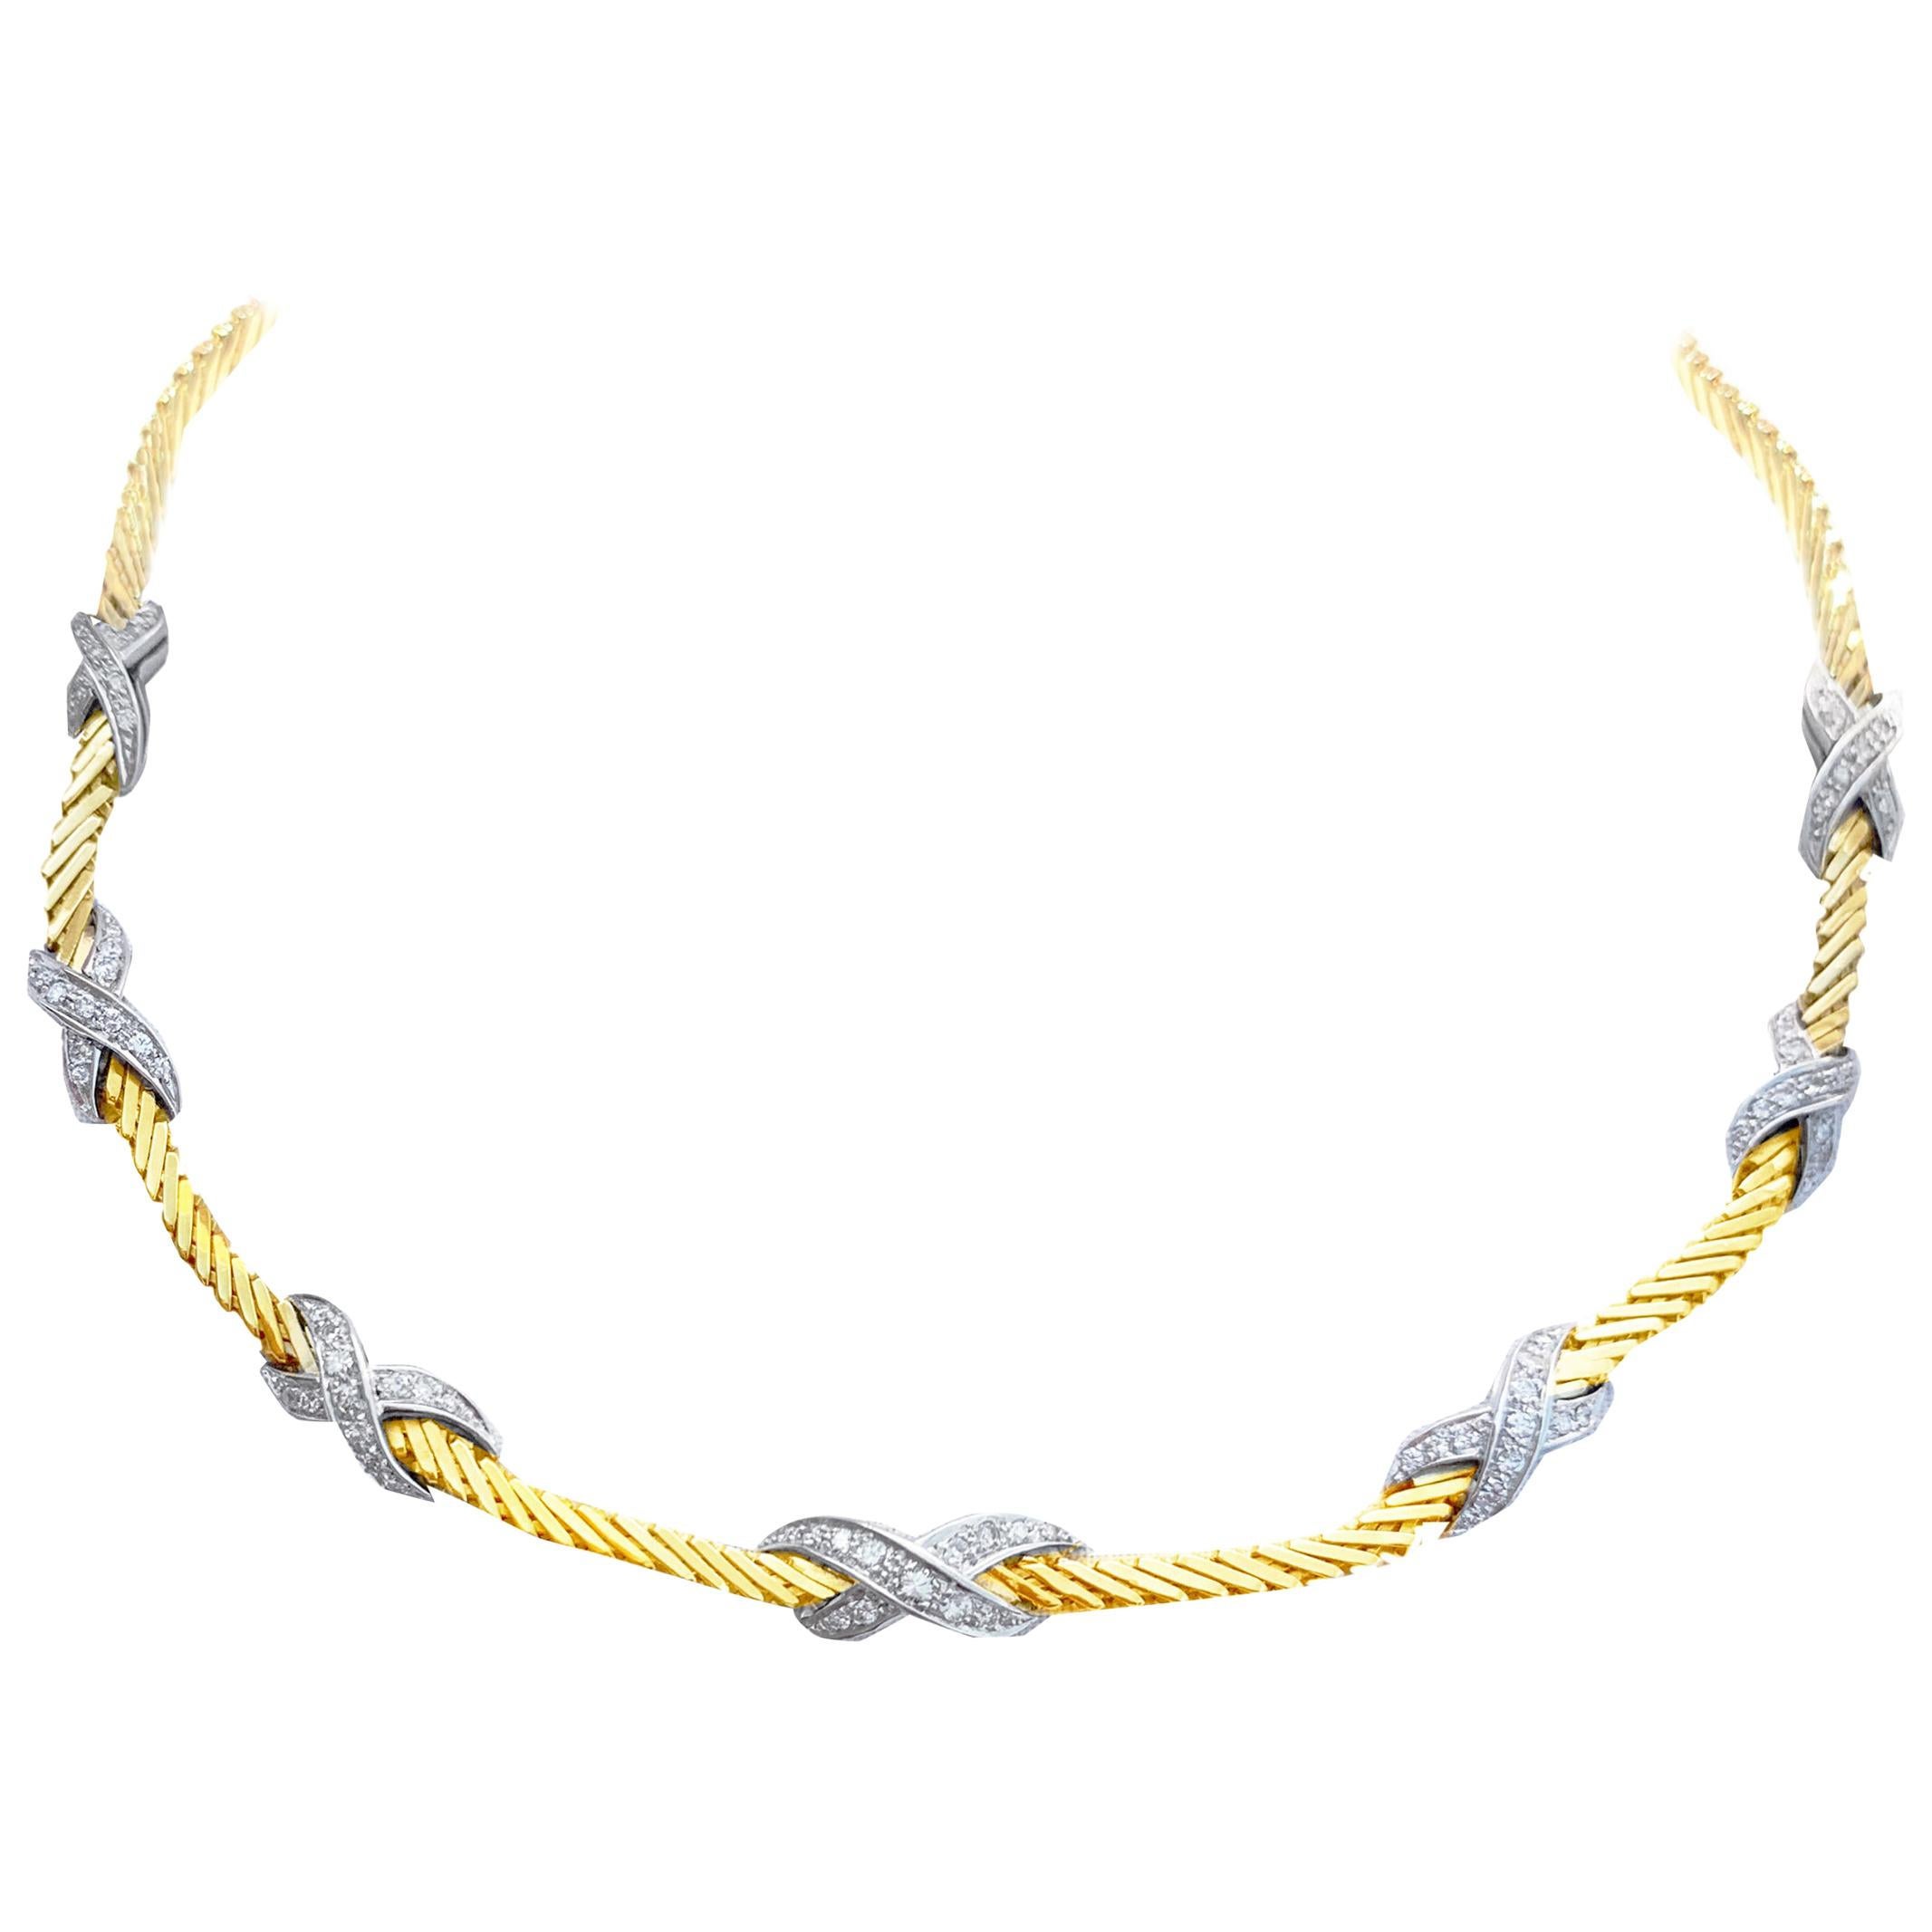 Vintage Necklace with Diamond Knots Mounted in 18 Karat Yellow Gold "Dolce vita" For Sale